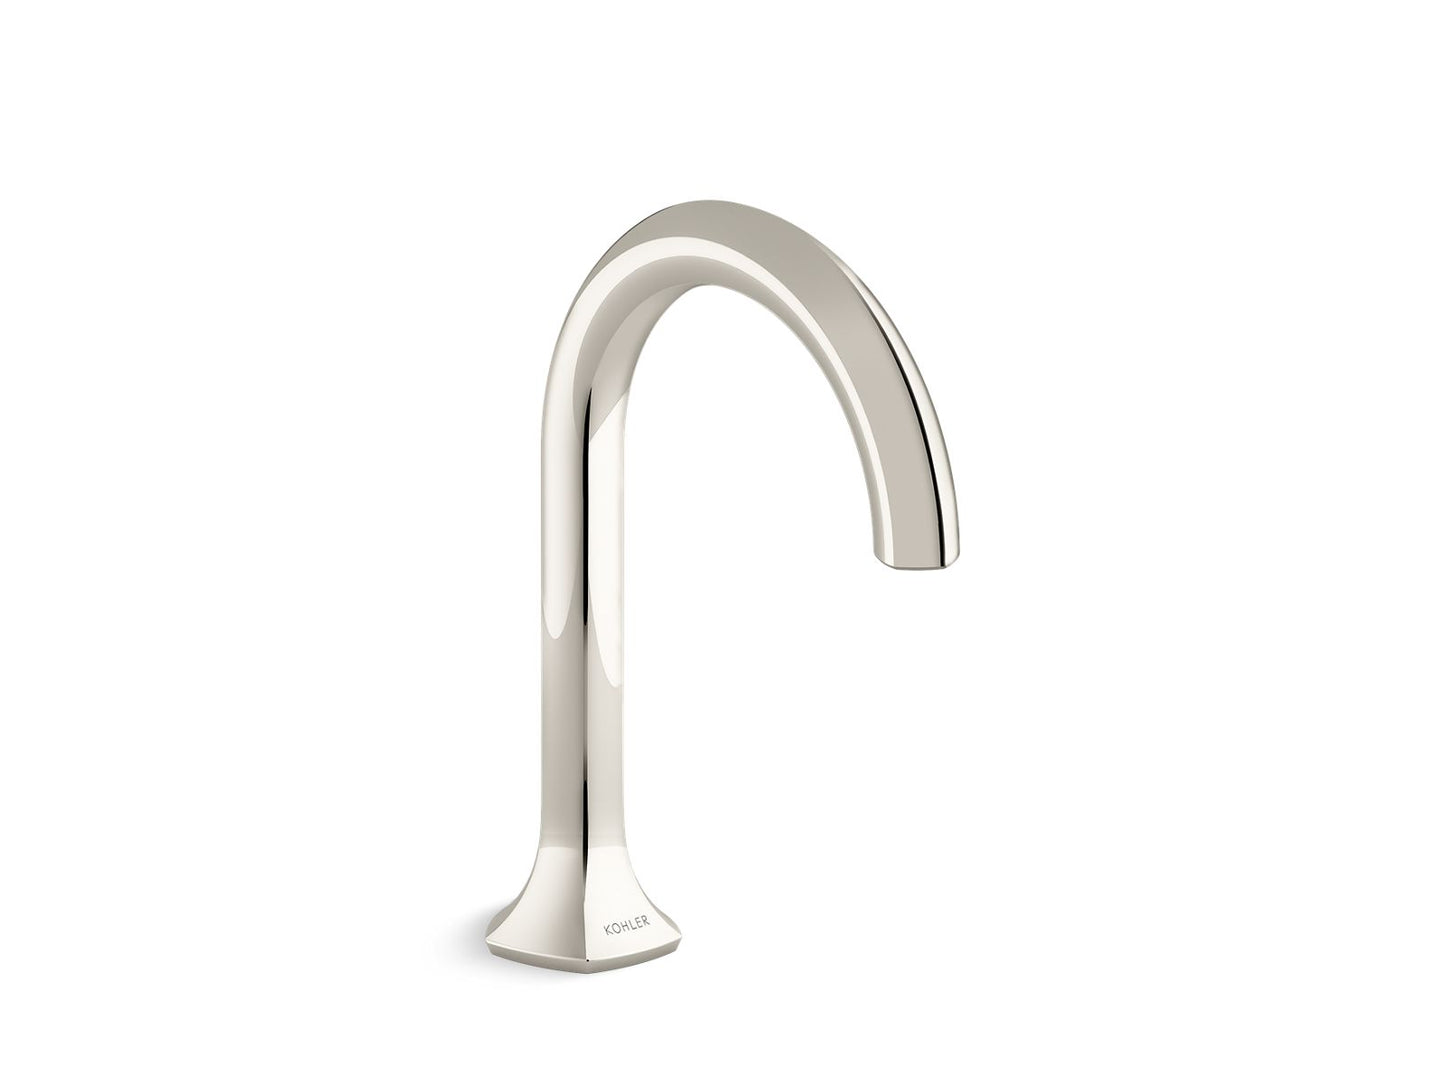 KOHLER K-27008-SN Occasion Bathroom Sink Faucet Spout With Cane Design, 1.2 Gpm In Vibrant Polished Nickel